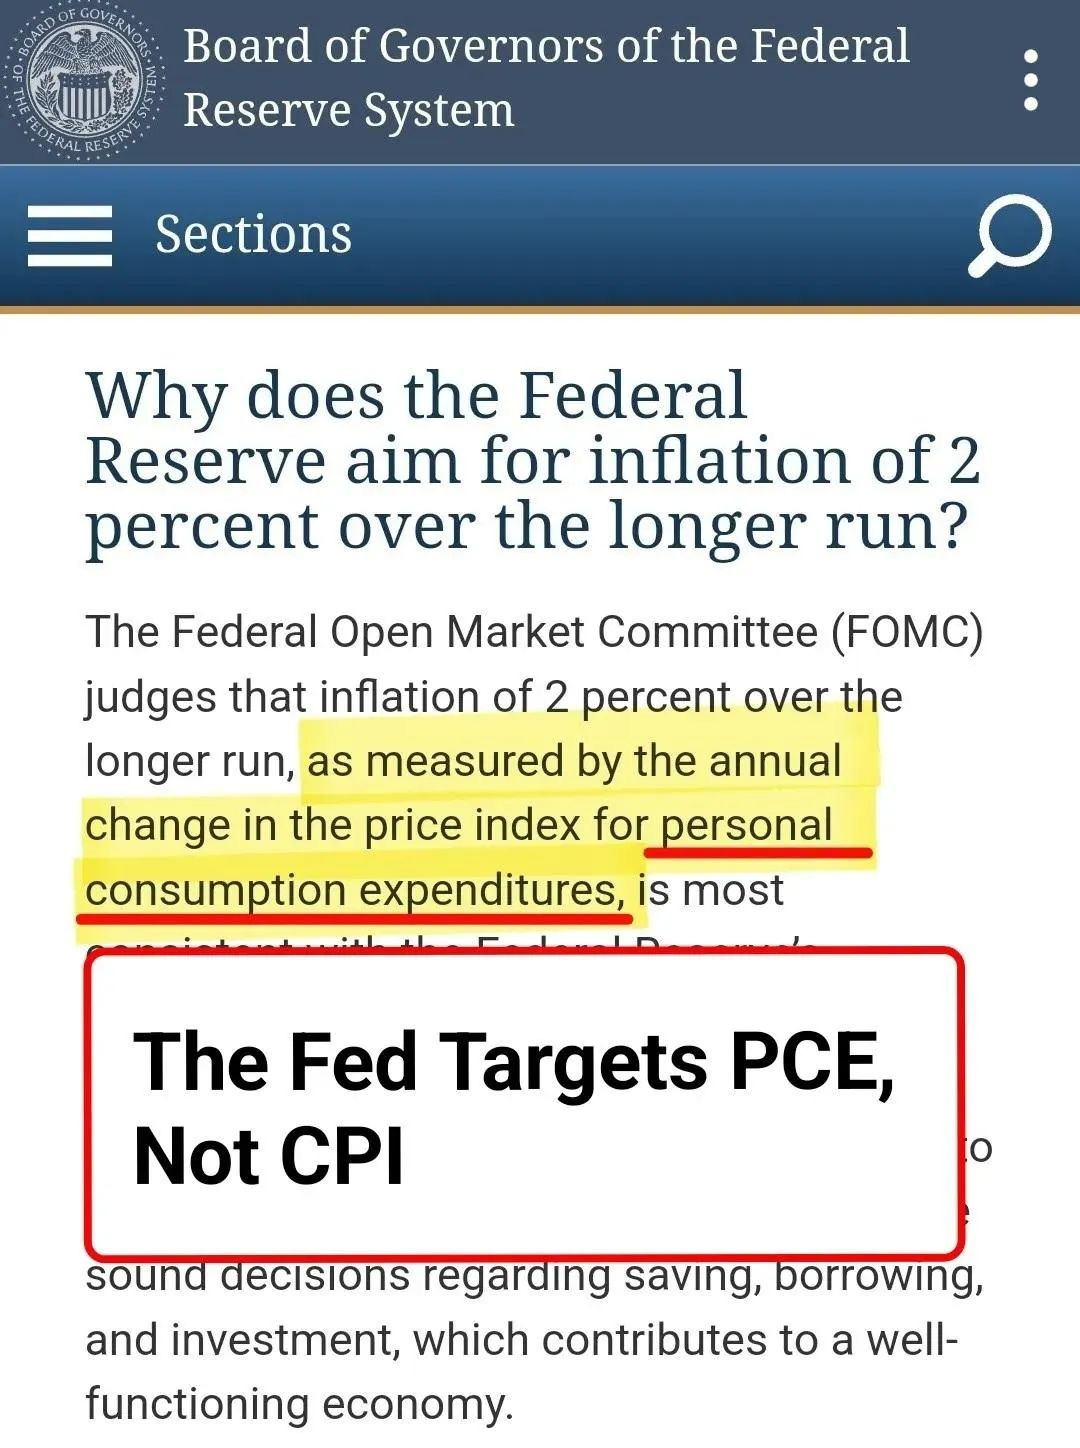 Photo by Ophir Gottlieb on January 31, 2024. May be an image of text that says 'Board of Governors of the Federal Reserve System Sections Why does the Federal Reserve aim for inflation of 2 percent over the longer run? The Federal Open Market Committee (FOMC) judges that inflation of 2 percent over the longer run, as measured by the annual change in the price index for personal consumption expenditures, is most The Fed Targets PCE, Not CPI sound decisions regarding saving, borrowing, and investment, which contributes to a well- functioning economy.'.